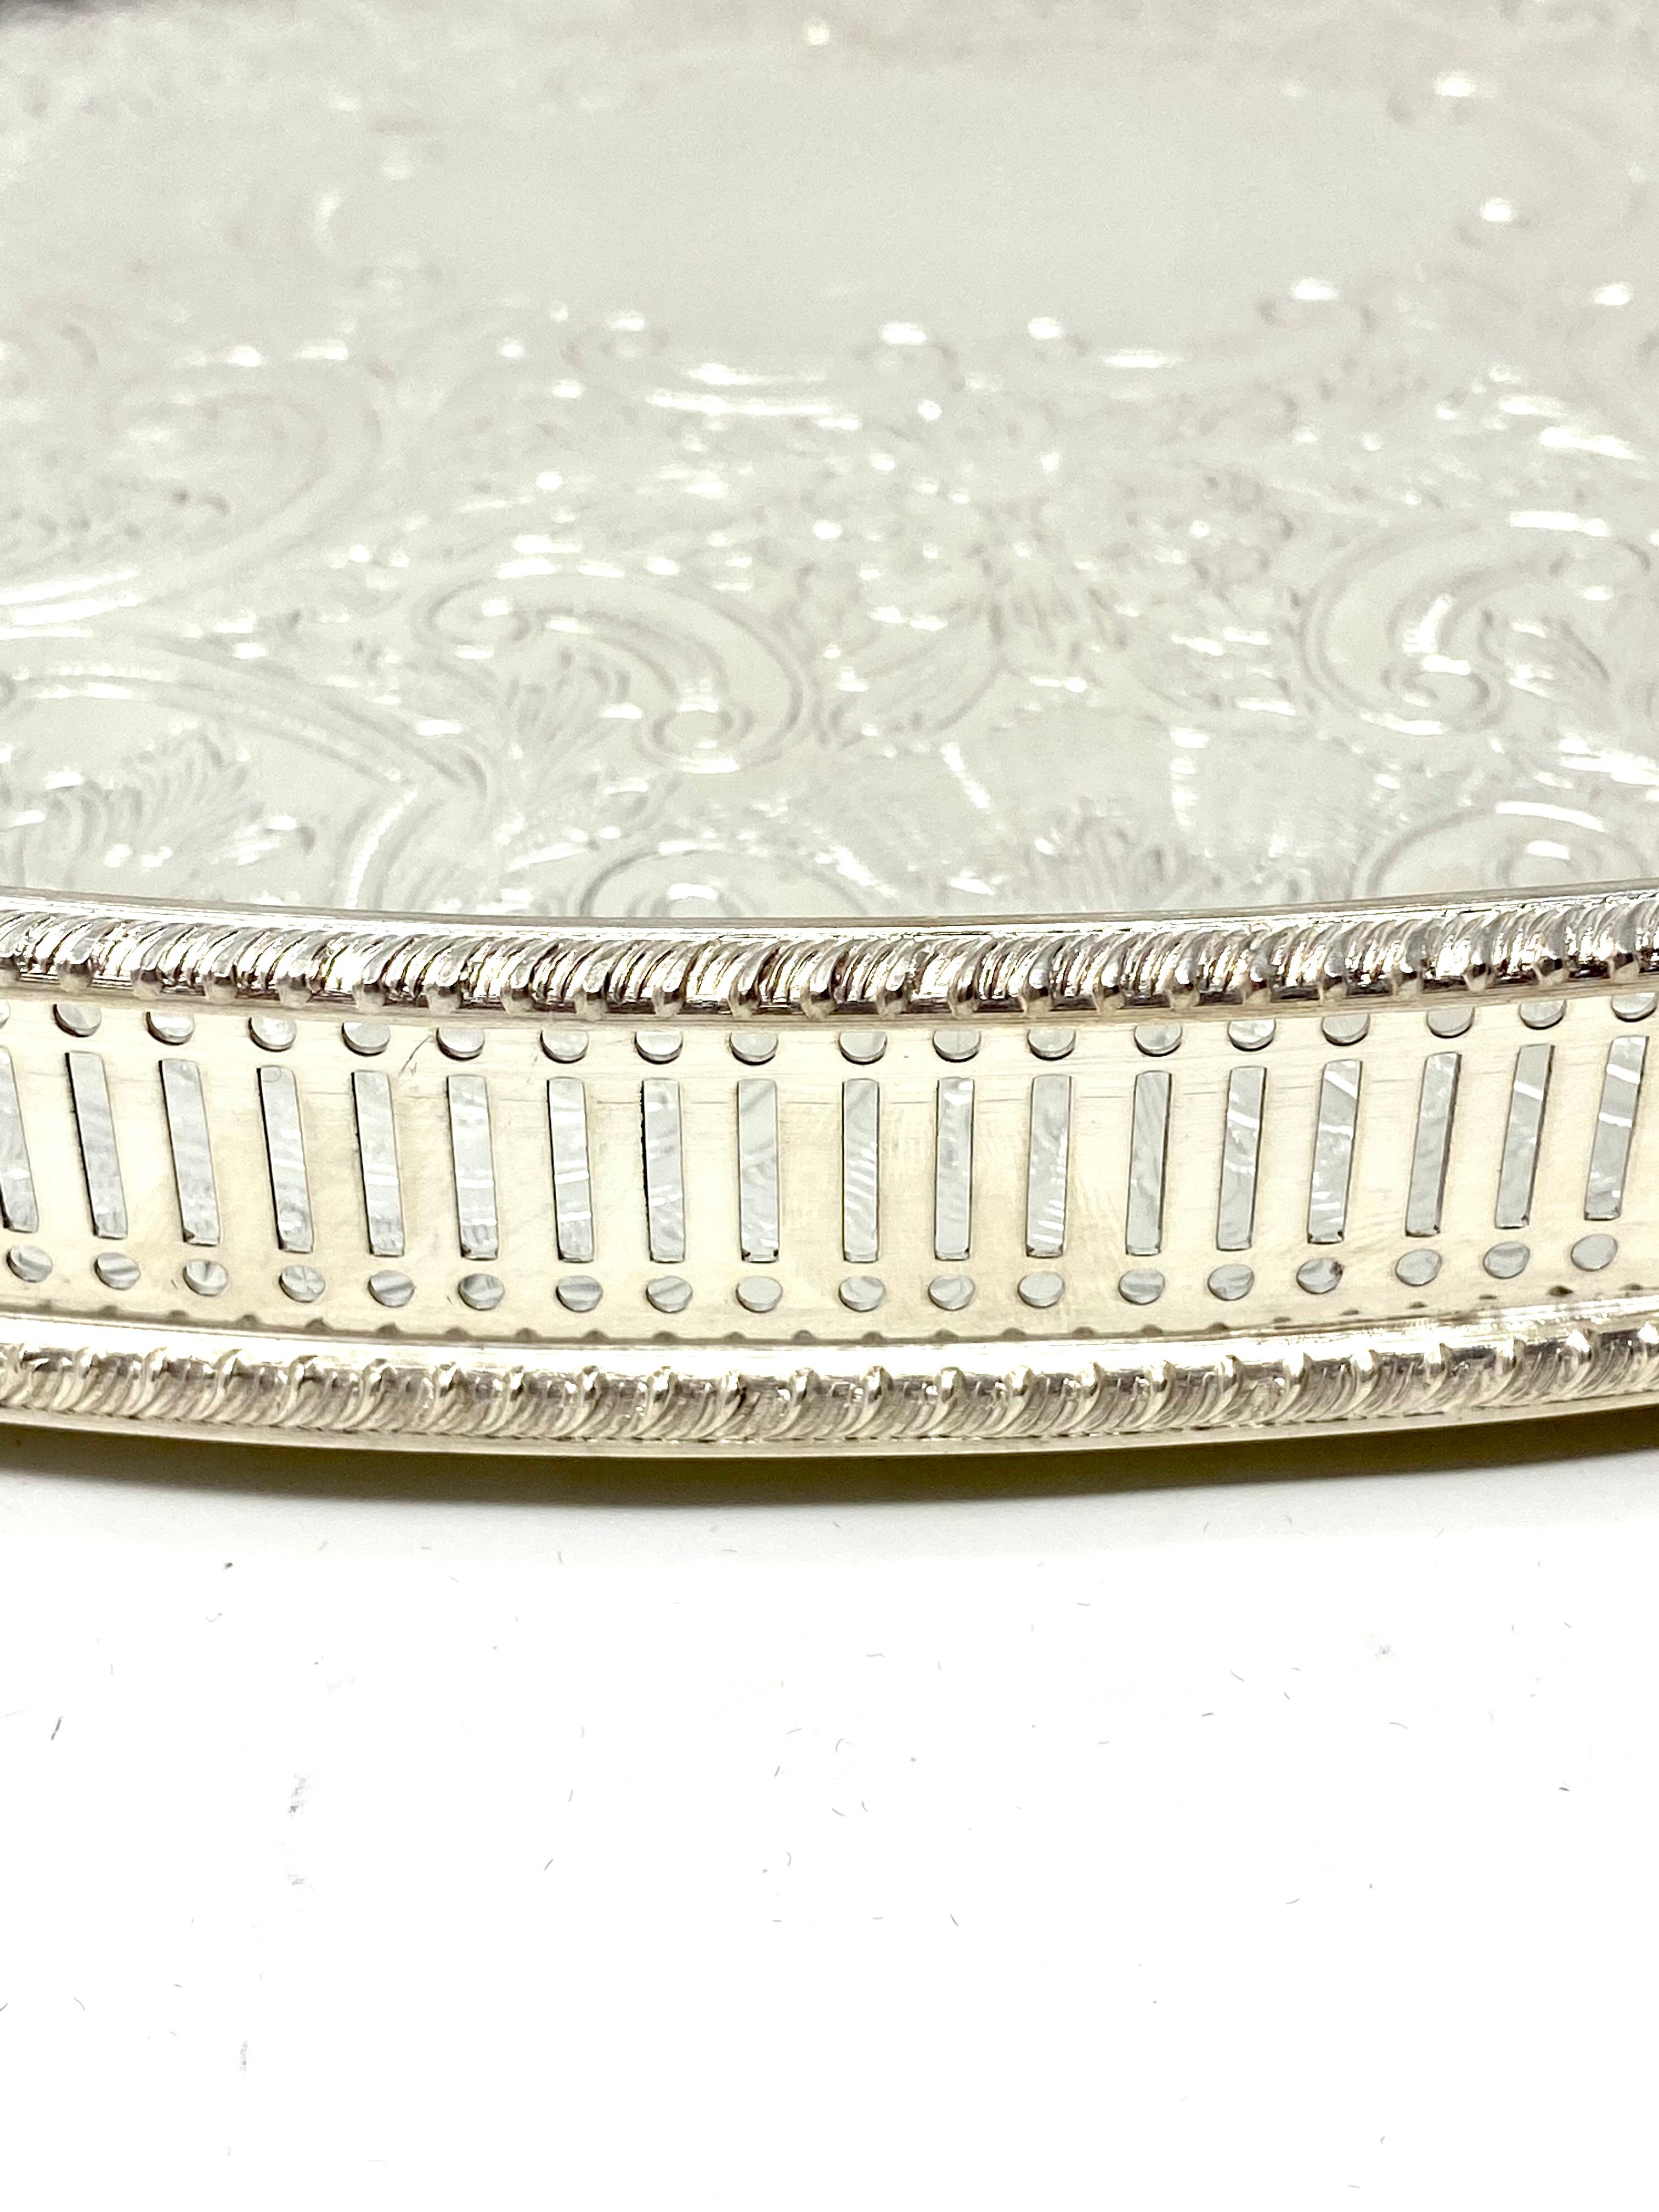 20th Century Handmade and Engraved English Silver Plated Footed Oval Tray with Gallery